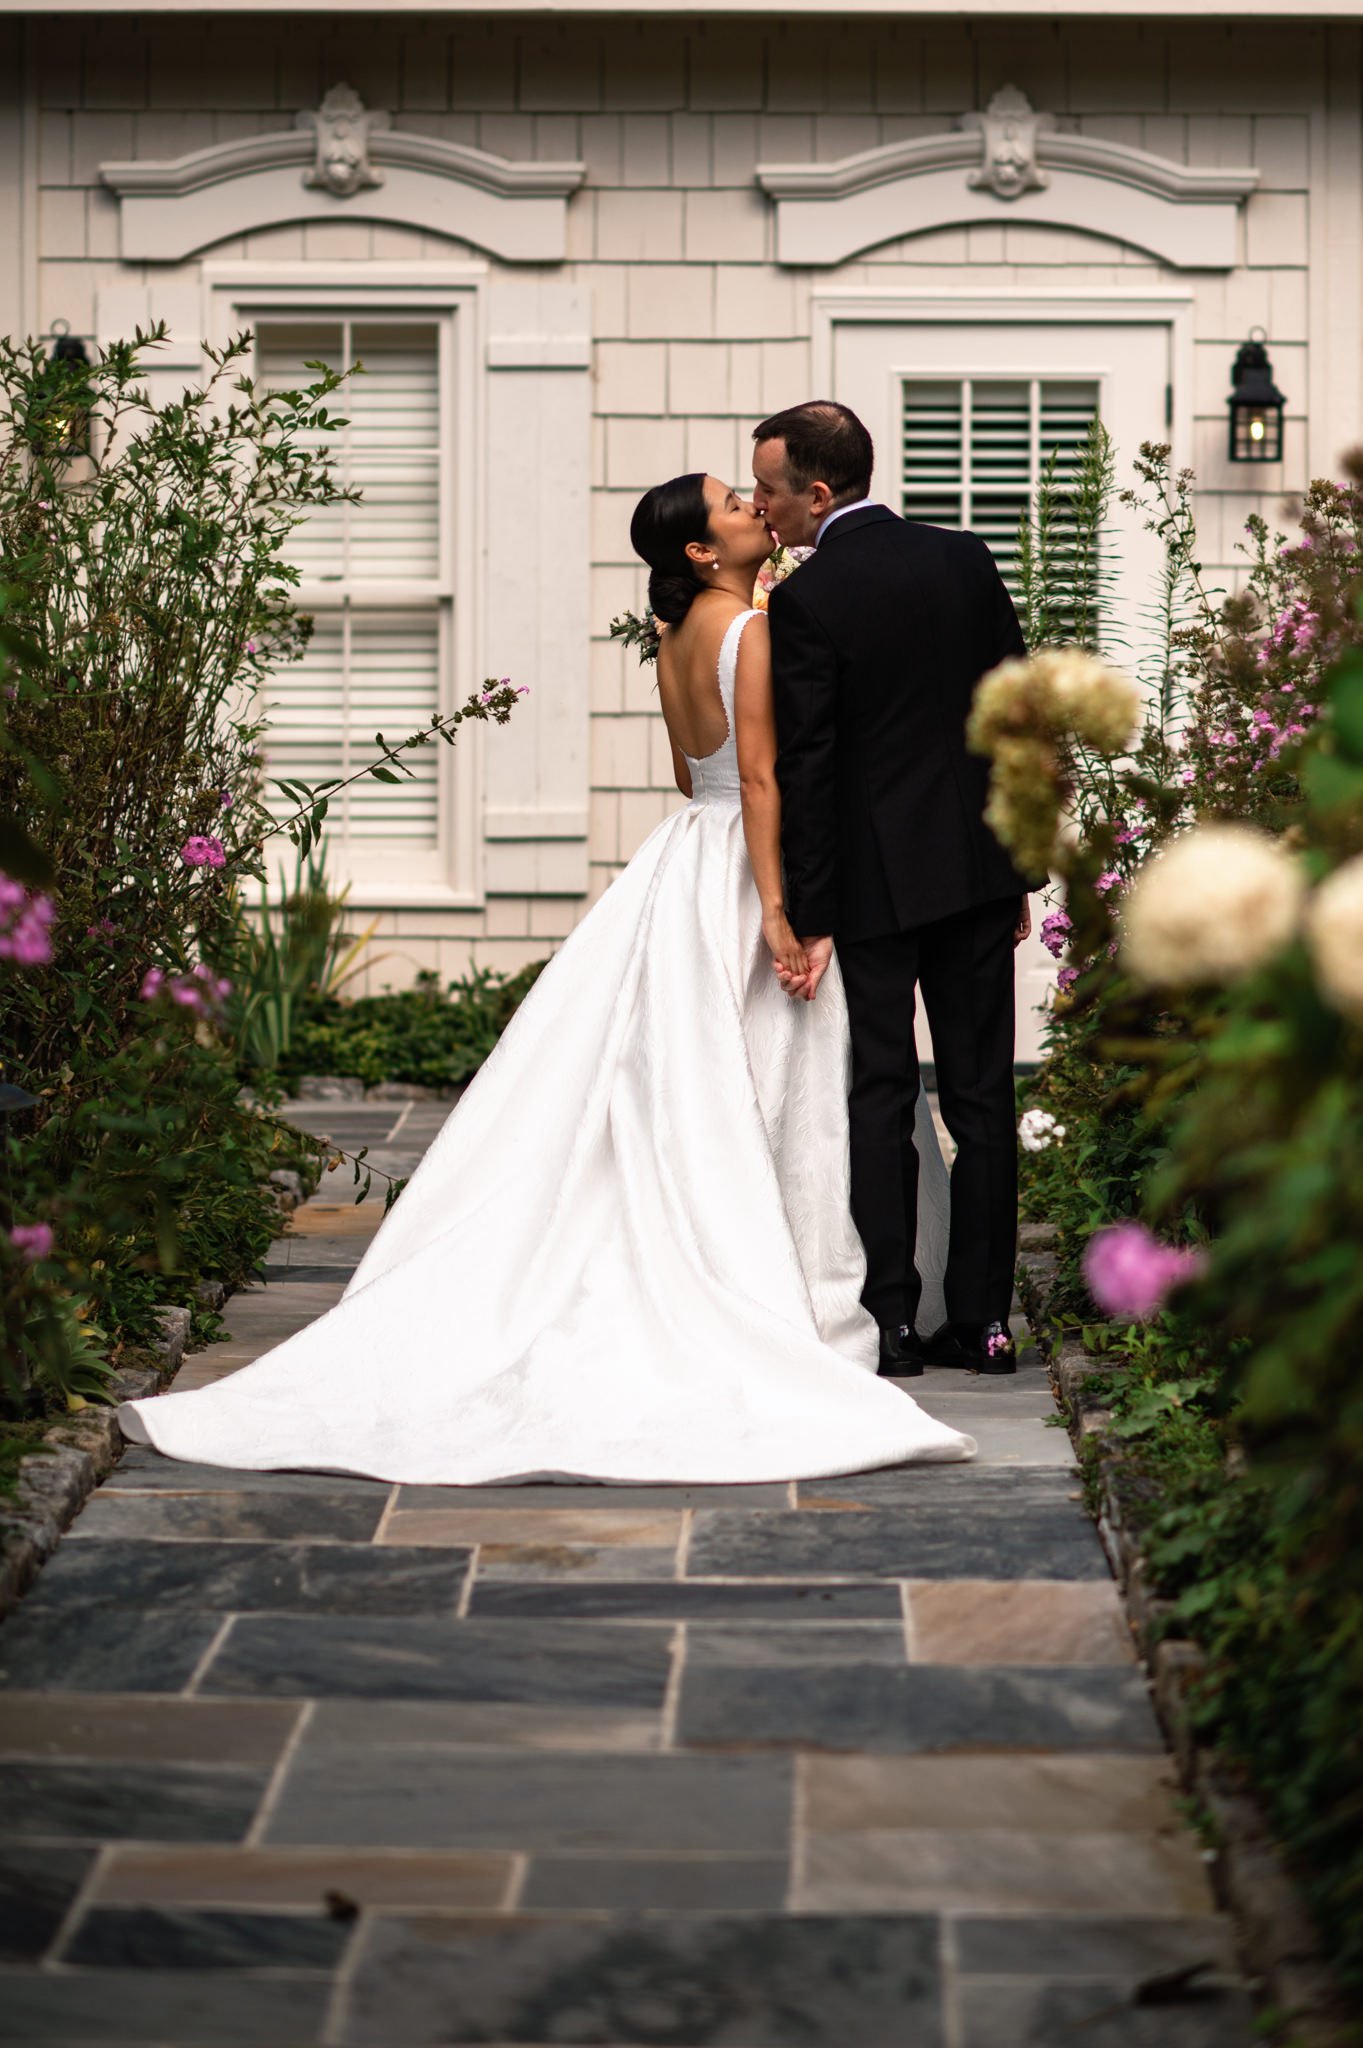 A bride and groom kiss in front of a house.